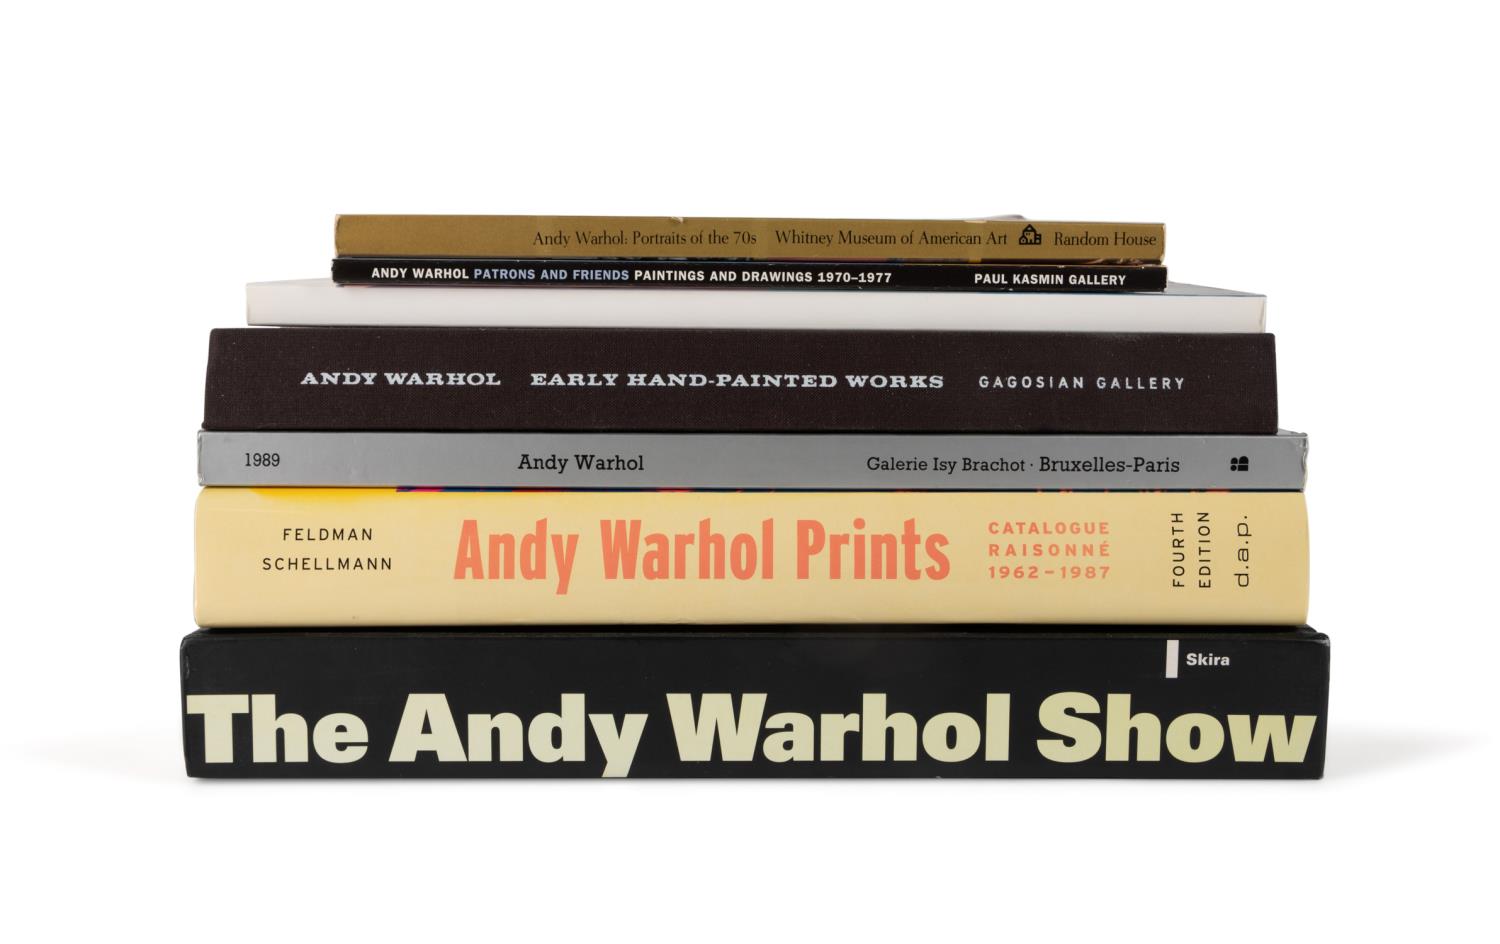 SEVEN COFFEE TABLE BOOKS ON ANDY 3cd9d1